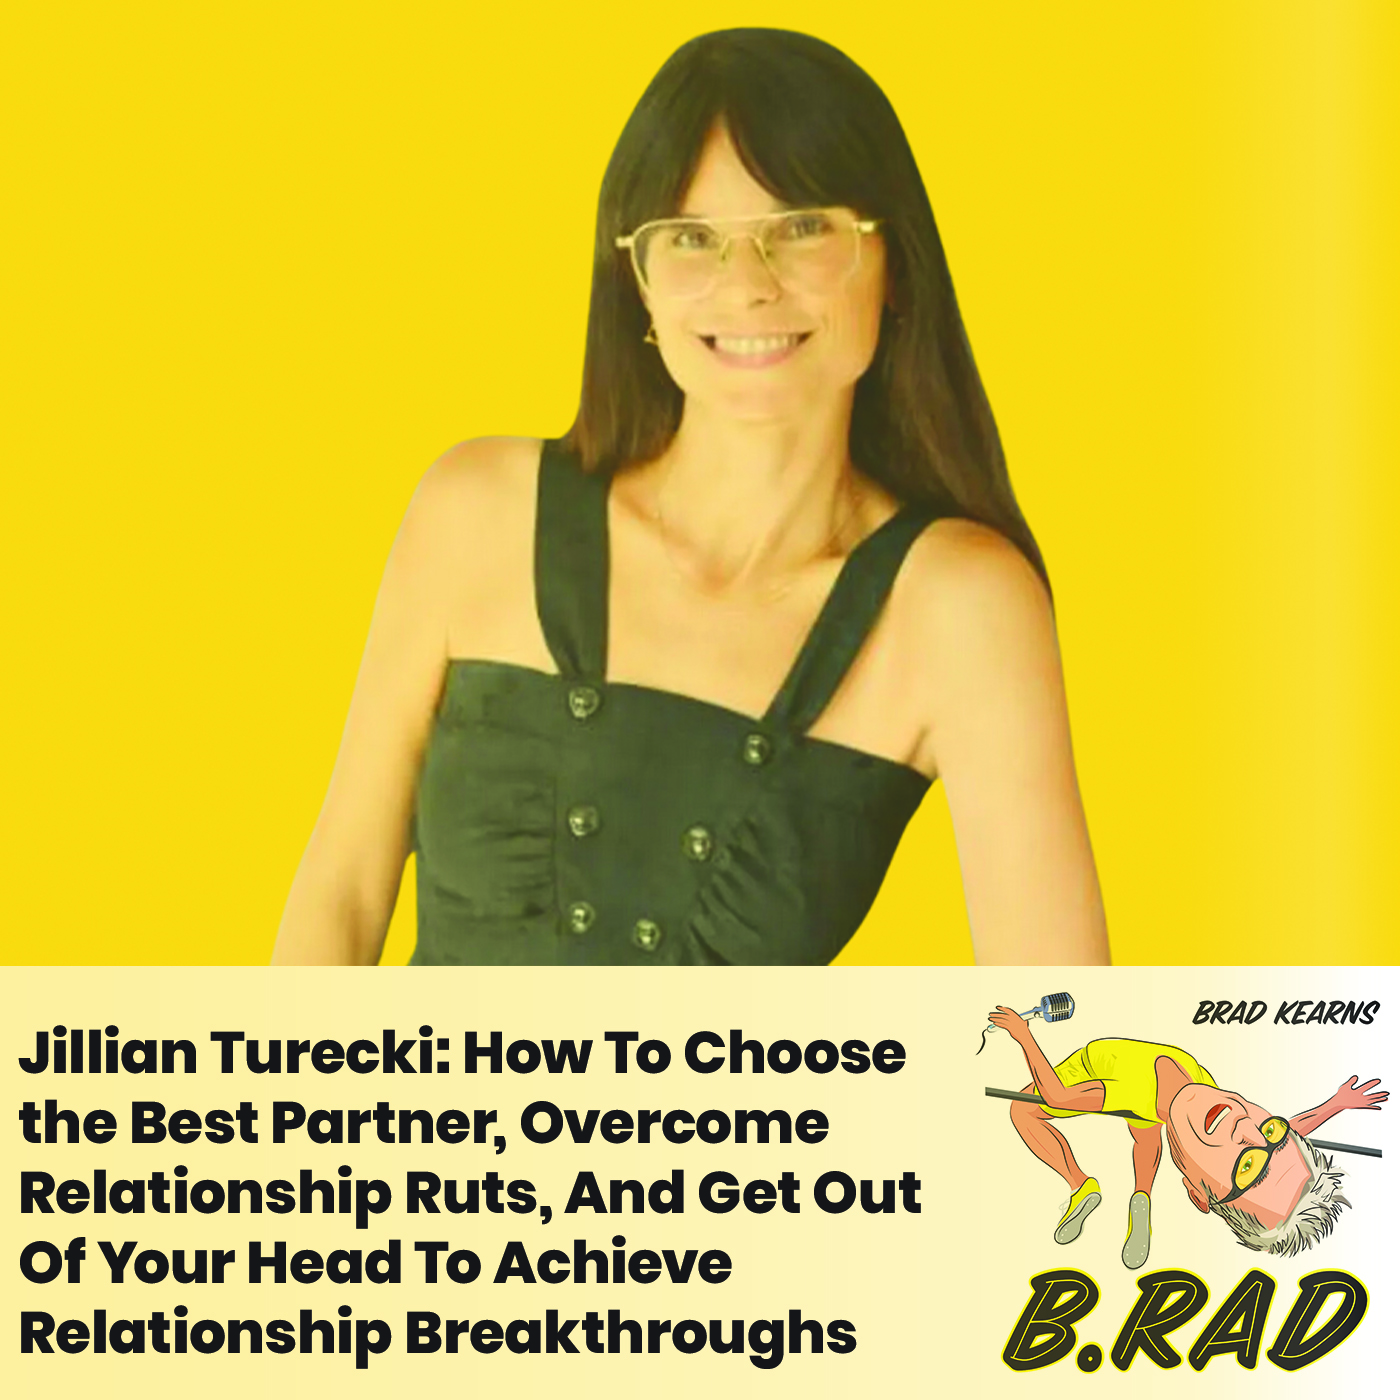 Jillian Turecki: How To Choose the Best Partner, Overcome Relationship Ruts, And Get Out Of Your Head To Achieve Relationship Breakthroughs